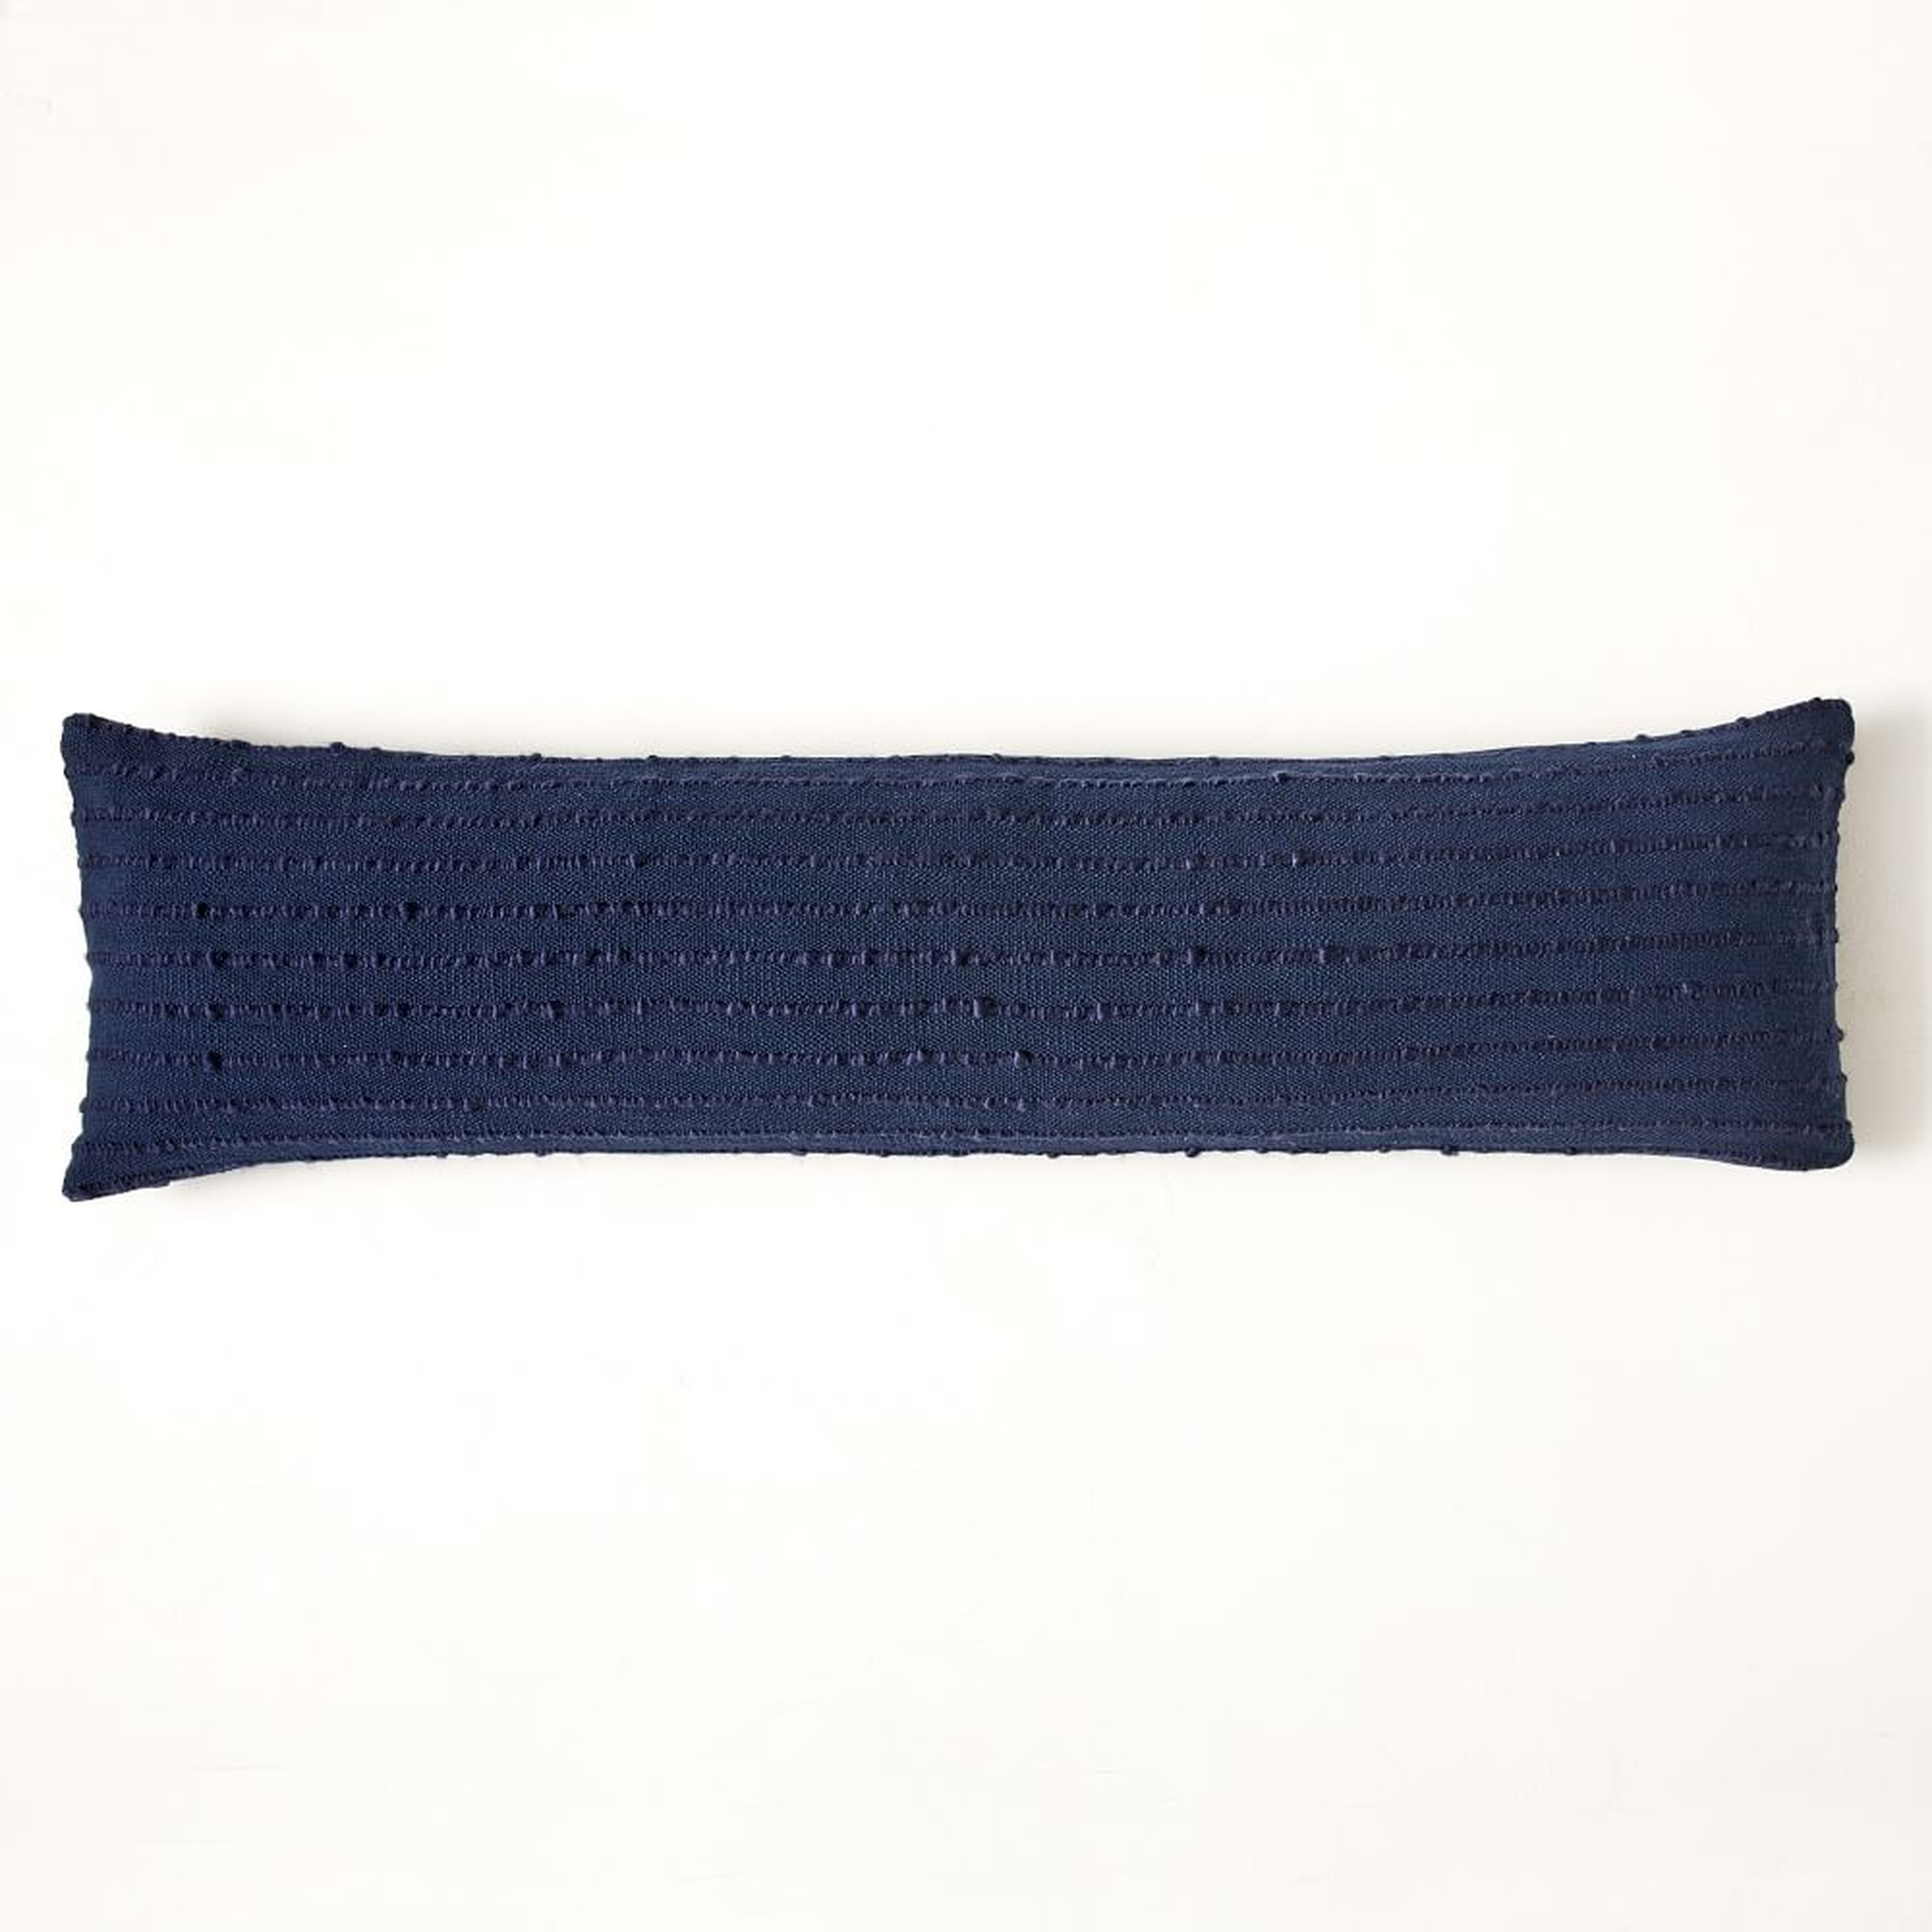 Soft Corded Pillow Cover, 12"x46", Midnight - West Elm